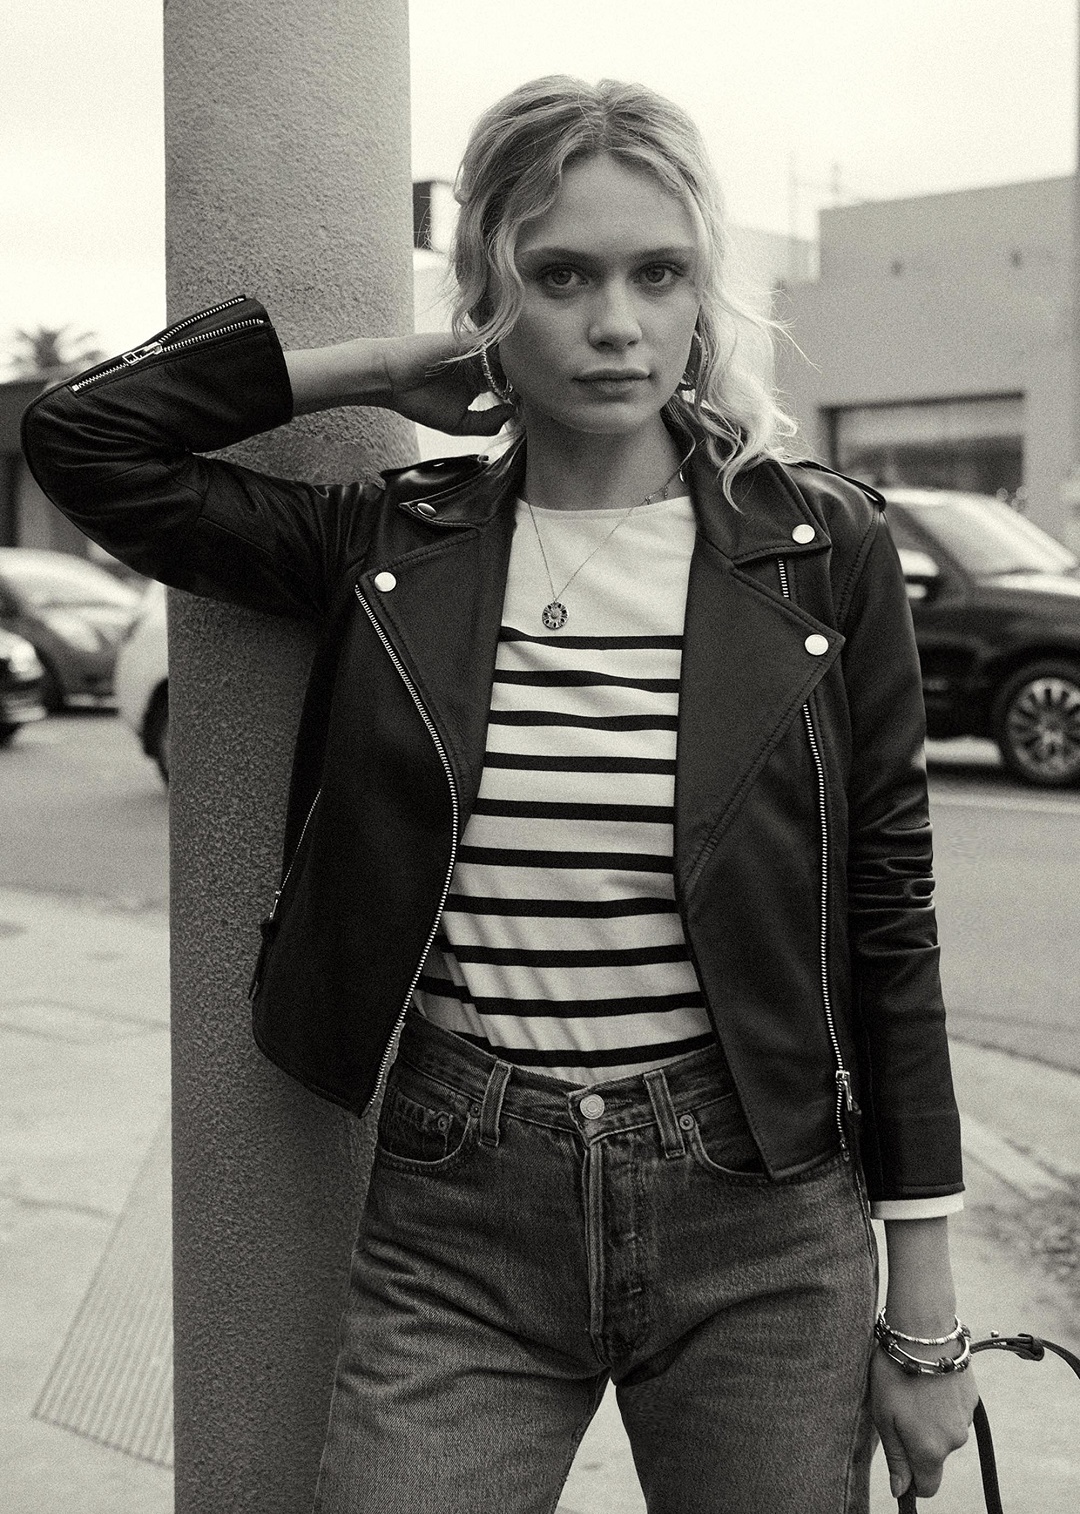 Black Leather Jacket with Sailor Stripe Tee and High Waist Blue Jeans